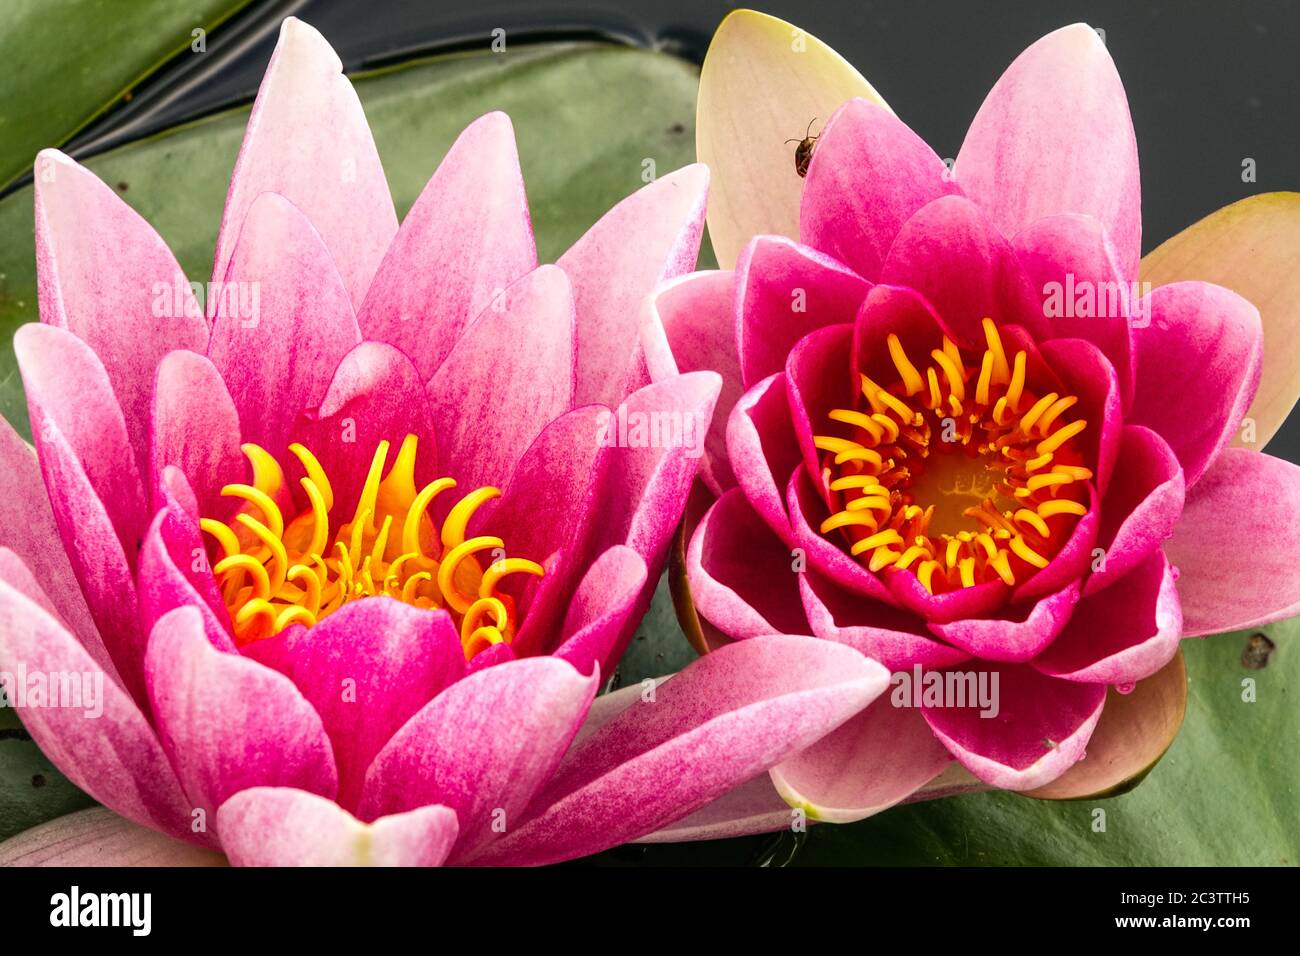 Two pink water lilies close up flowers in garden pond Nymphaea water lily garden Stock Photo